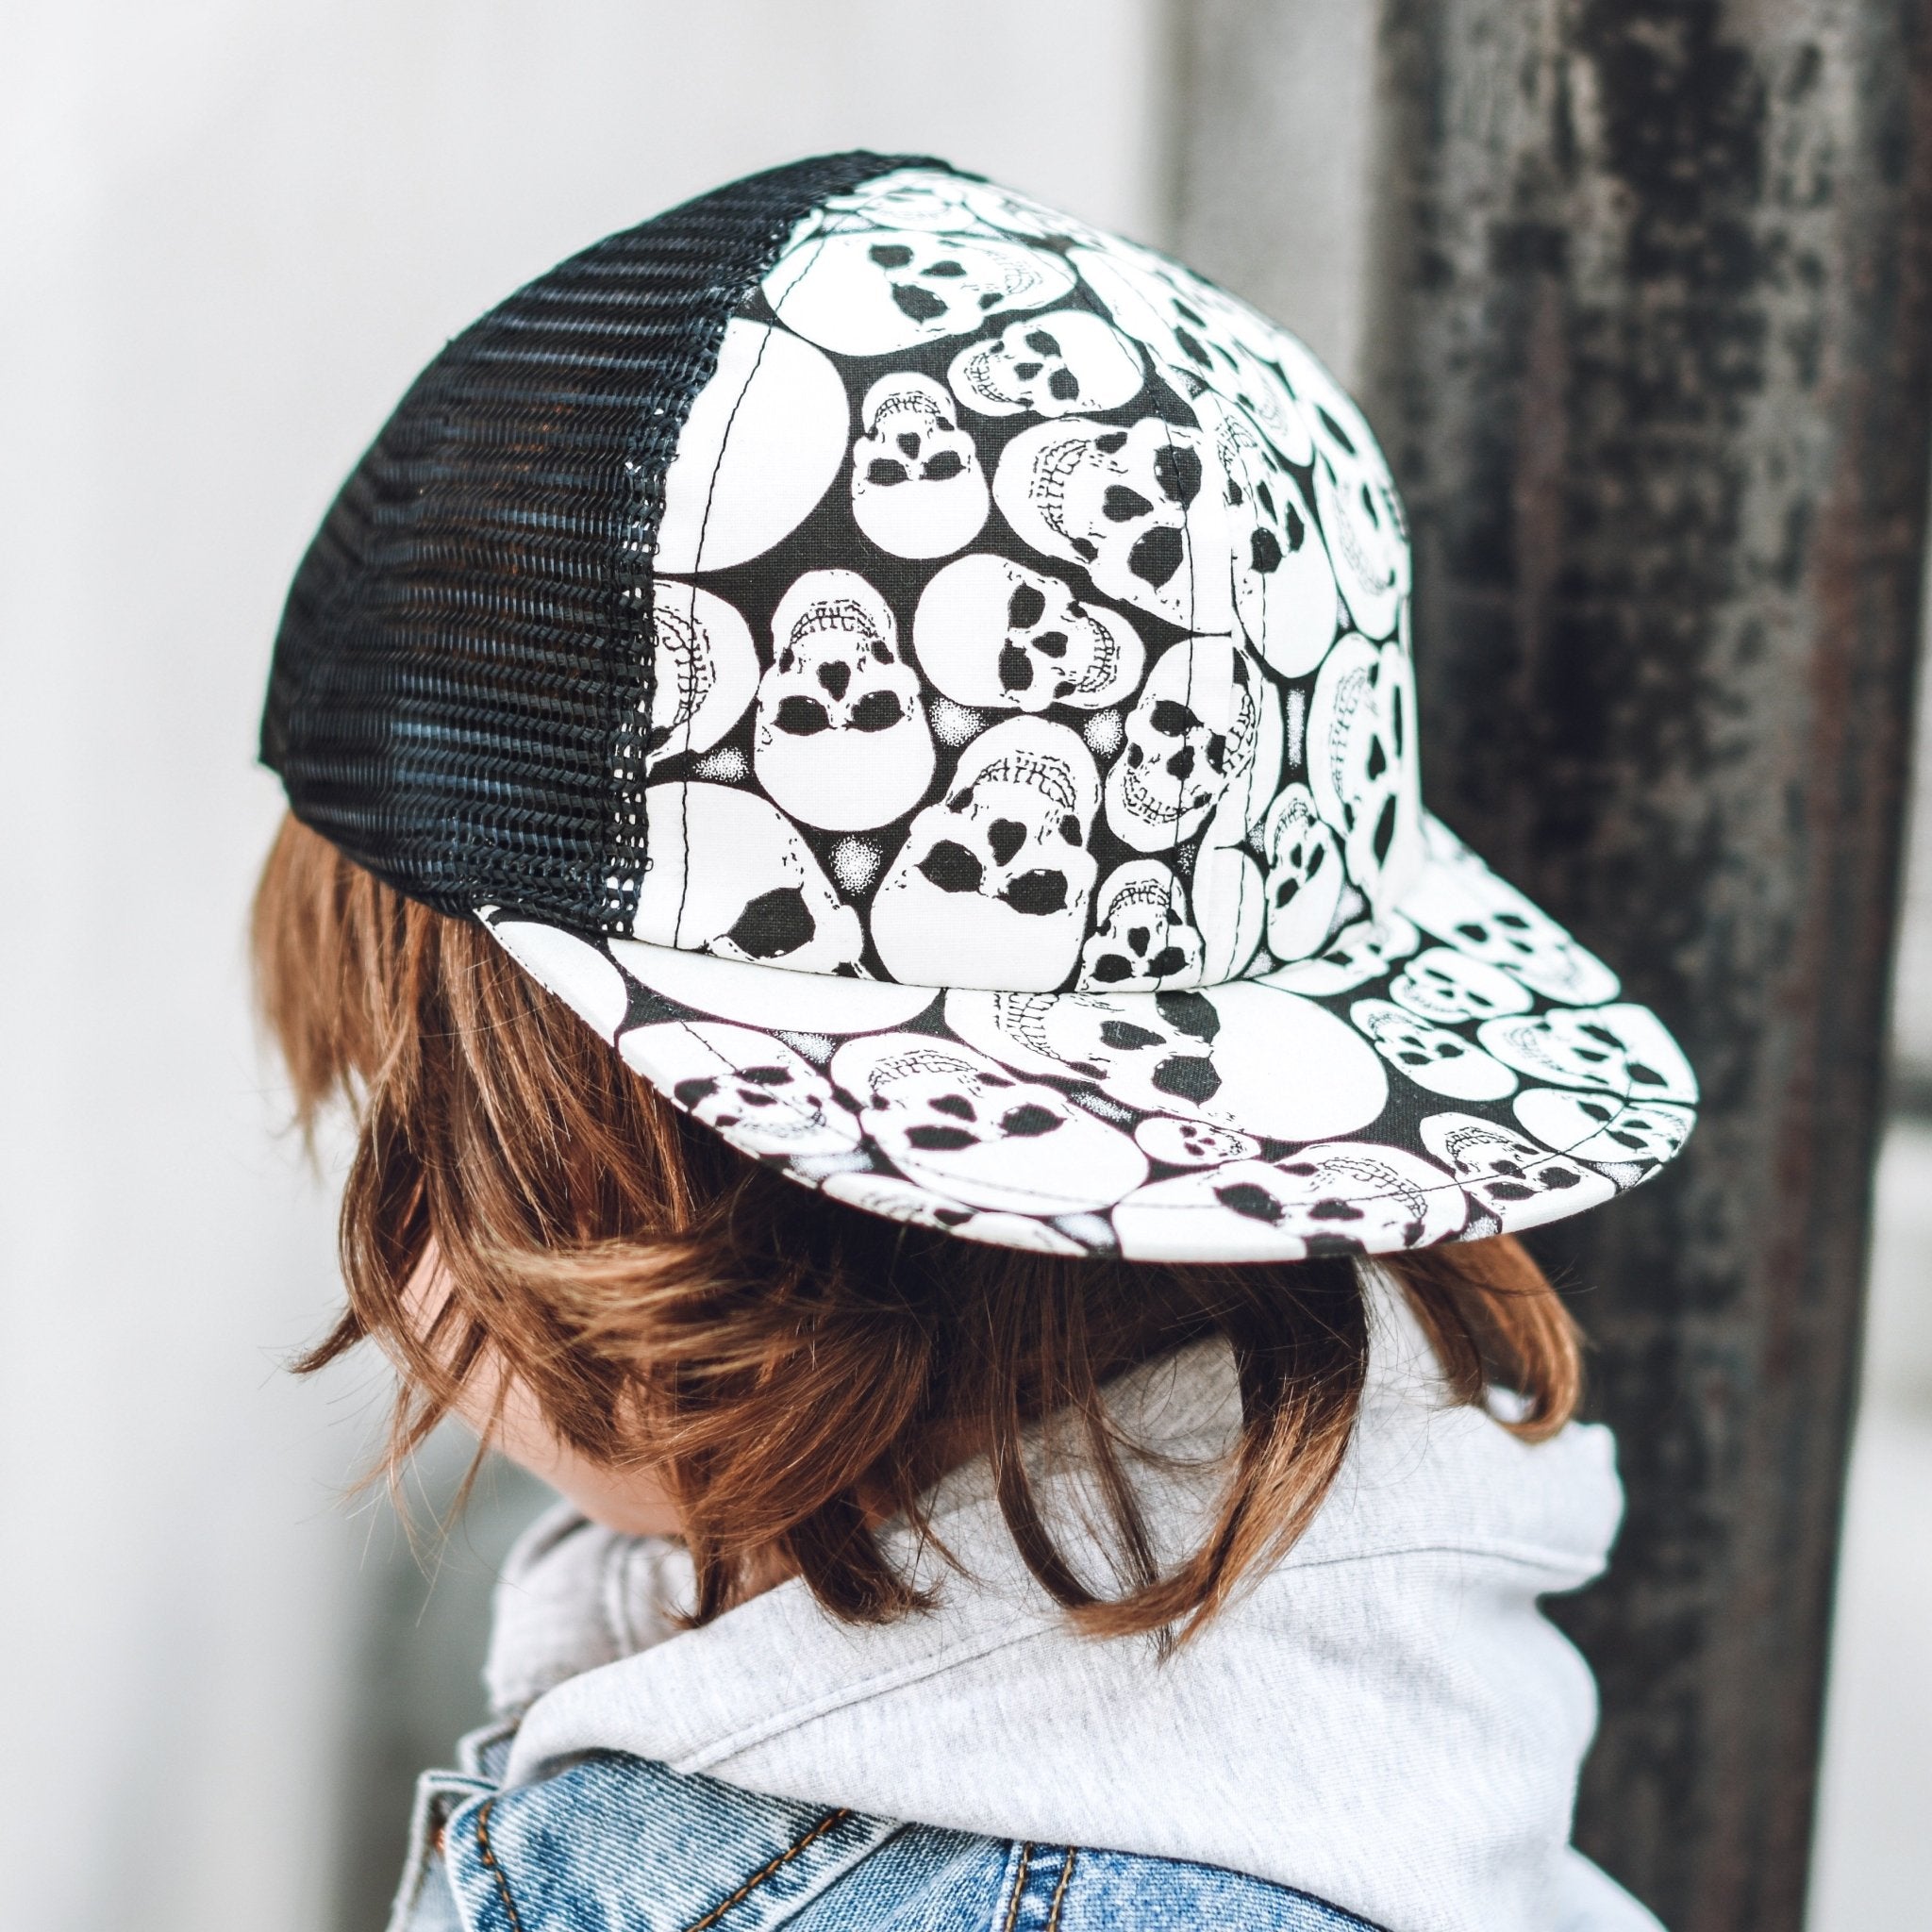 Closeup image of a boy in a kid's trucker hat with black and white skull print -Glow Skulls Trucker - George Hats